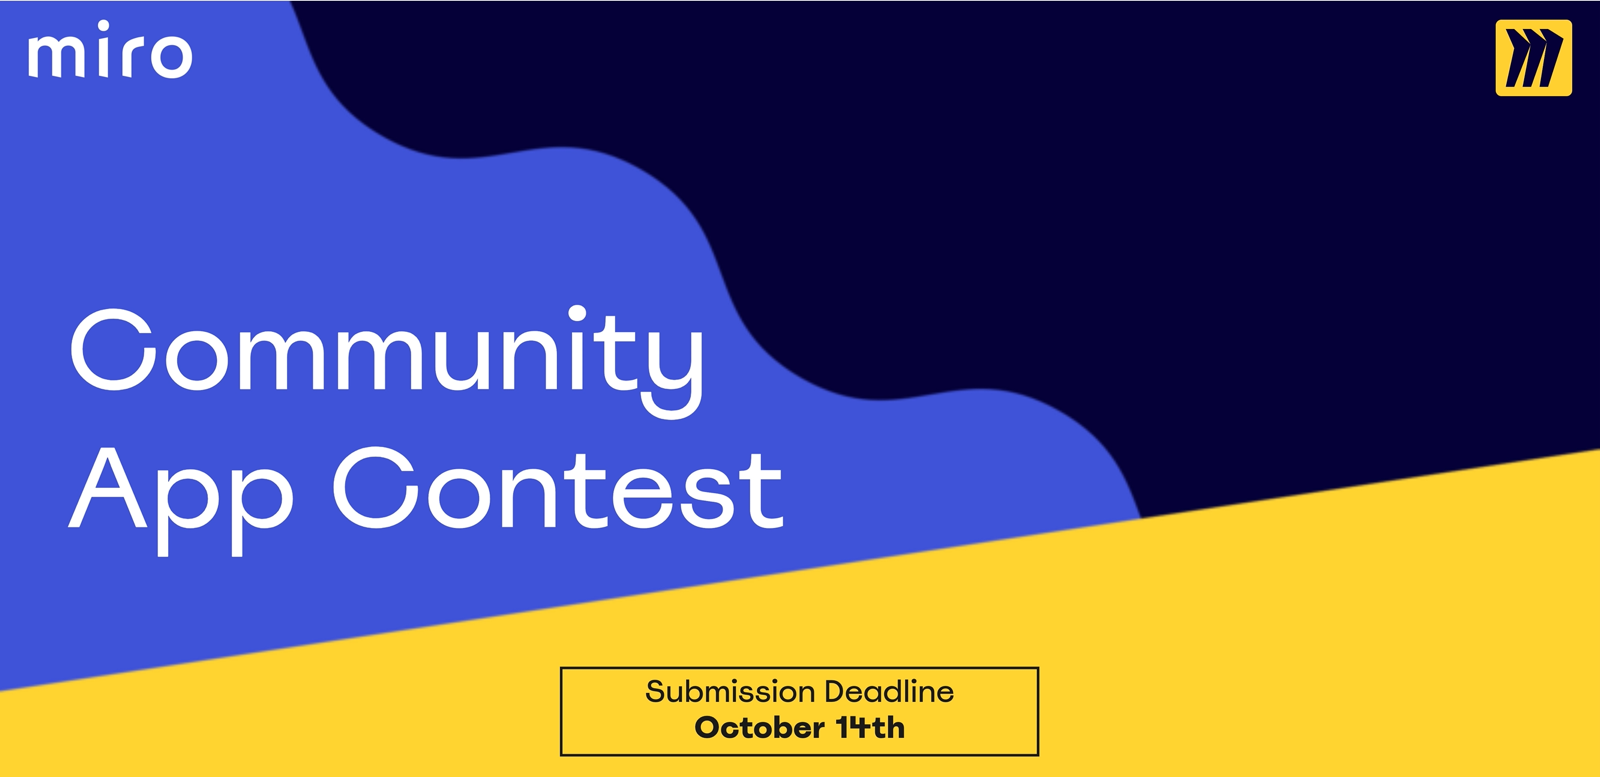 Join the Miro Community App Contest! To learn more about it, go to our Discord server. Sumbission deadline: October 14th 2022